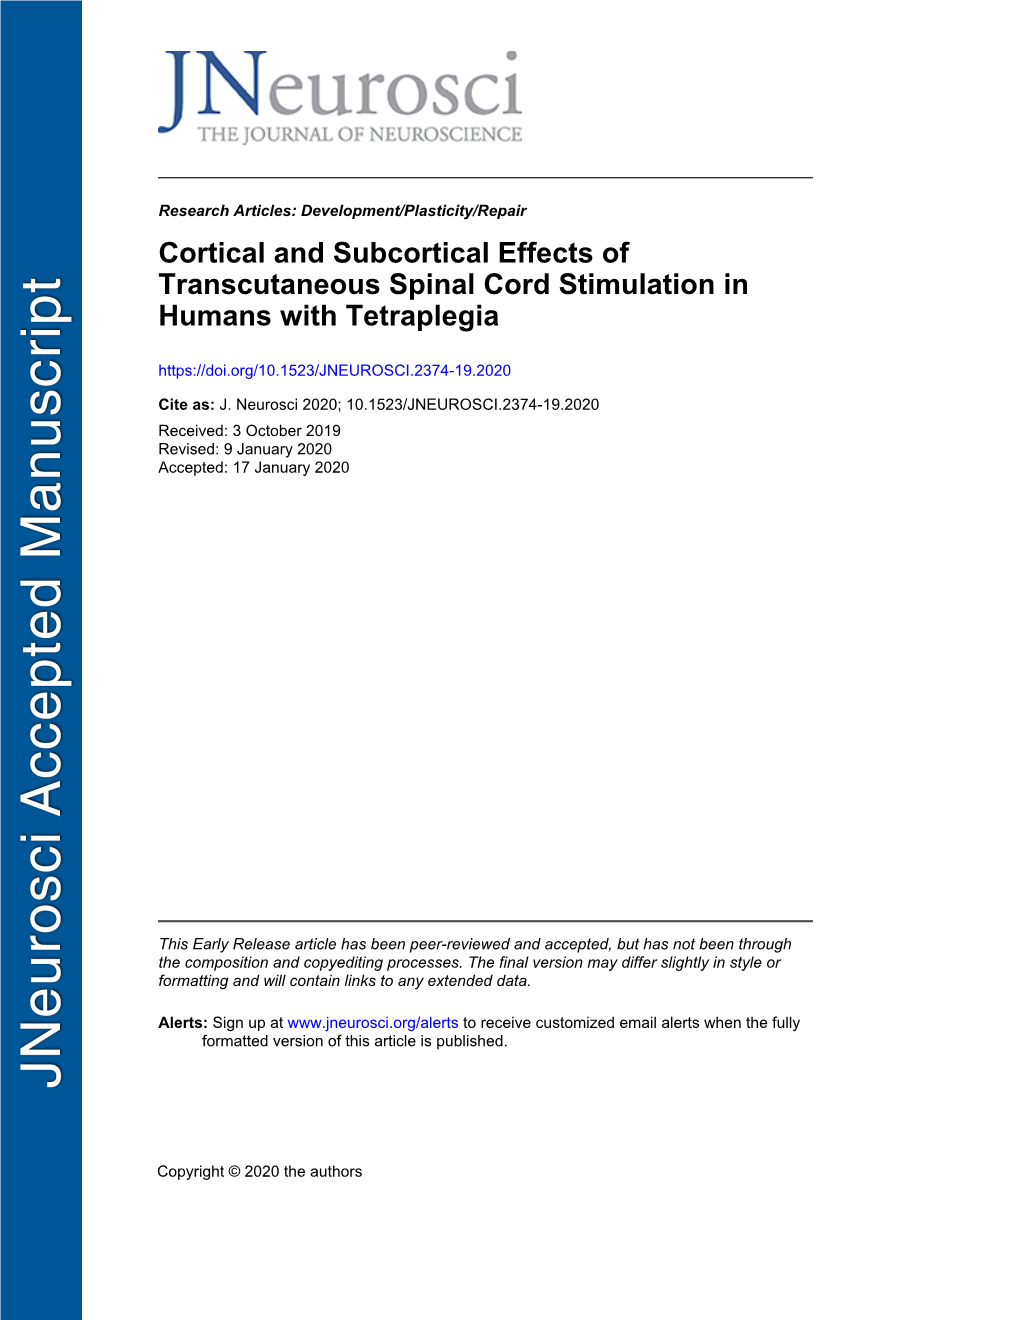 Cortical and Subcortical Effects of Transcutaneous Spinal Cord Stimulation in Humans with Tetraplegia